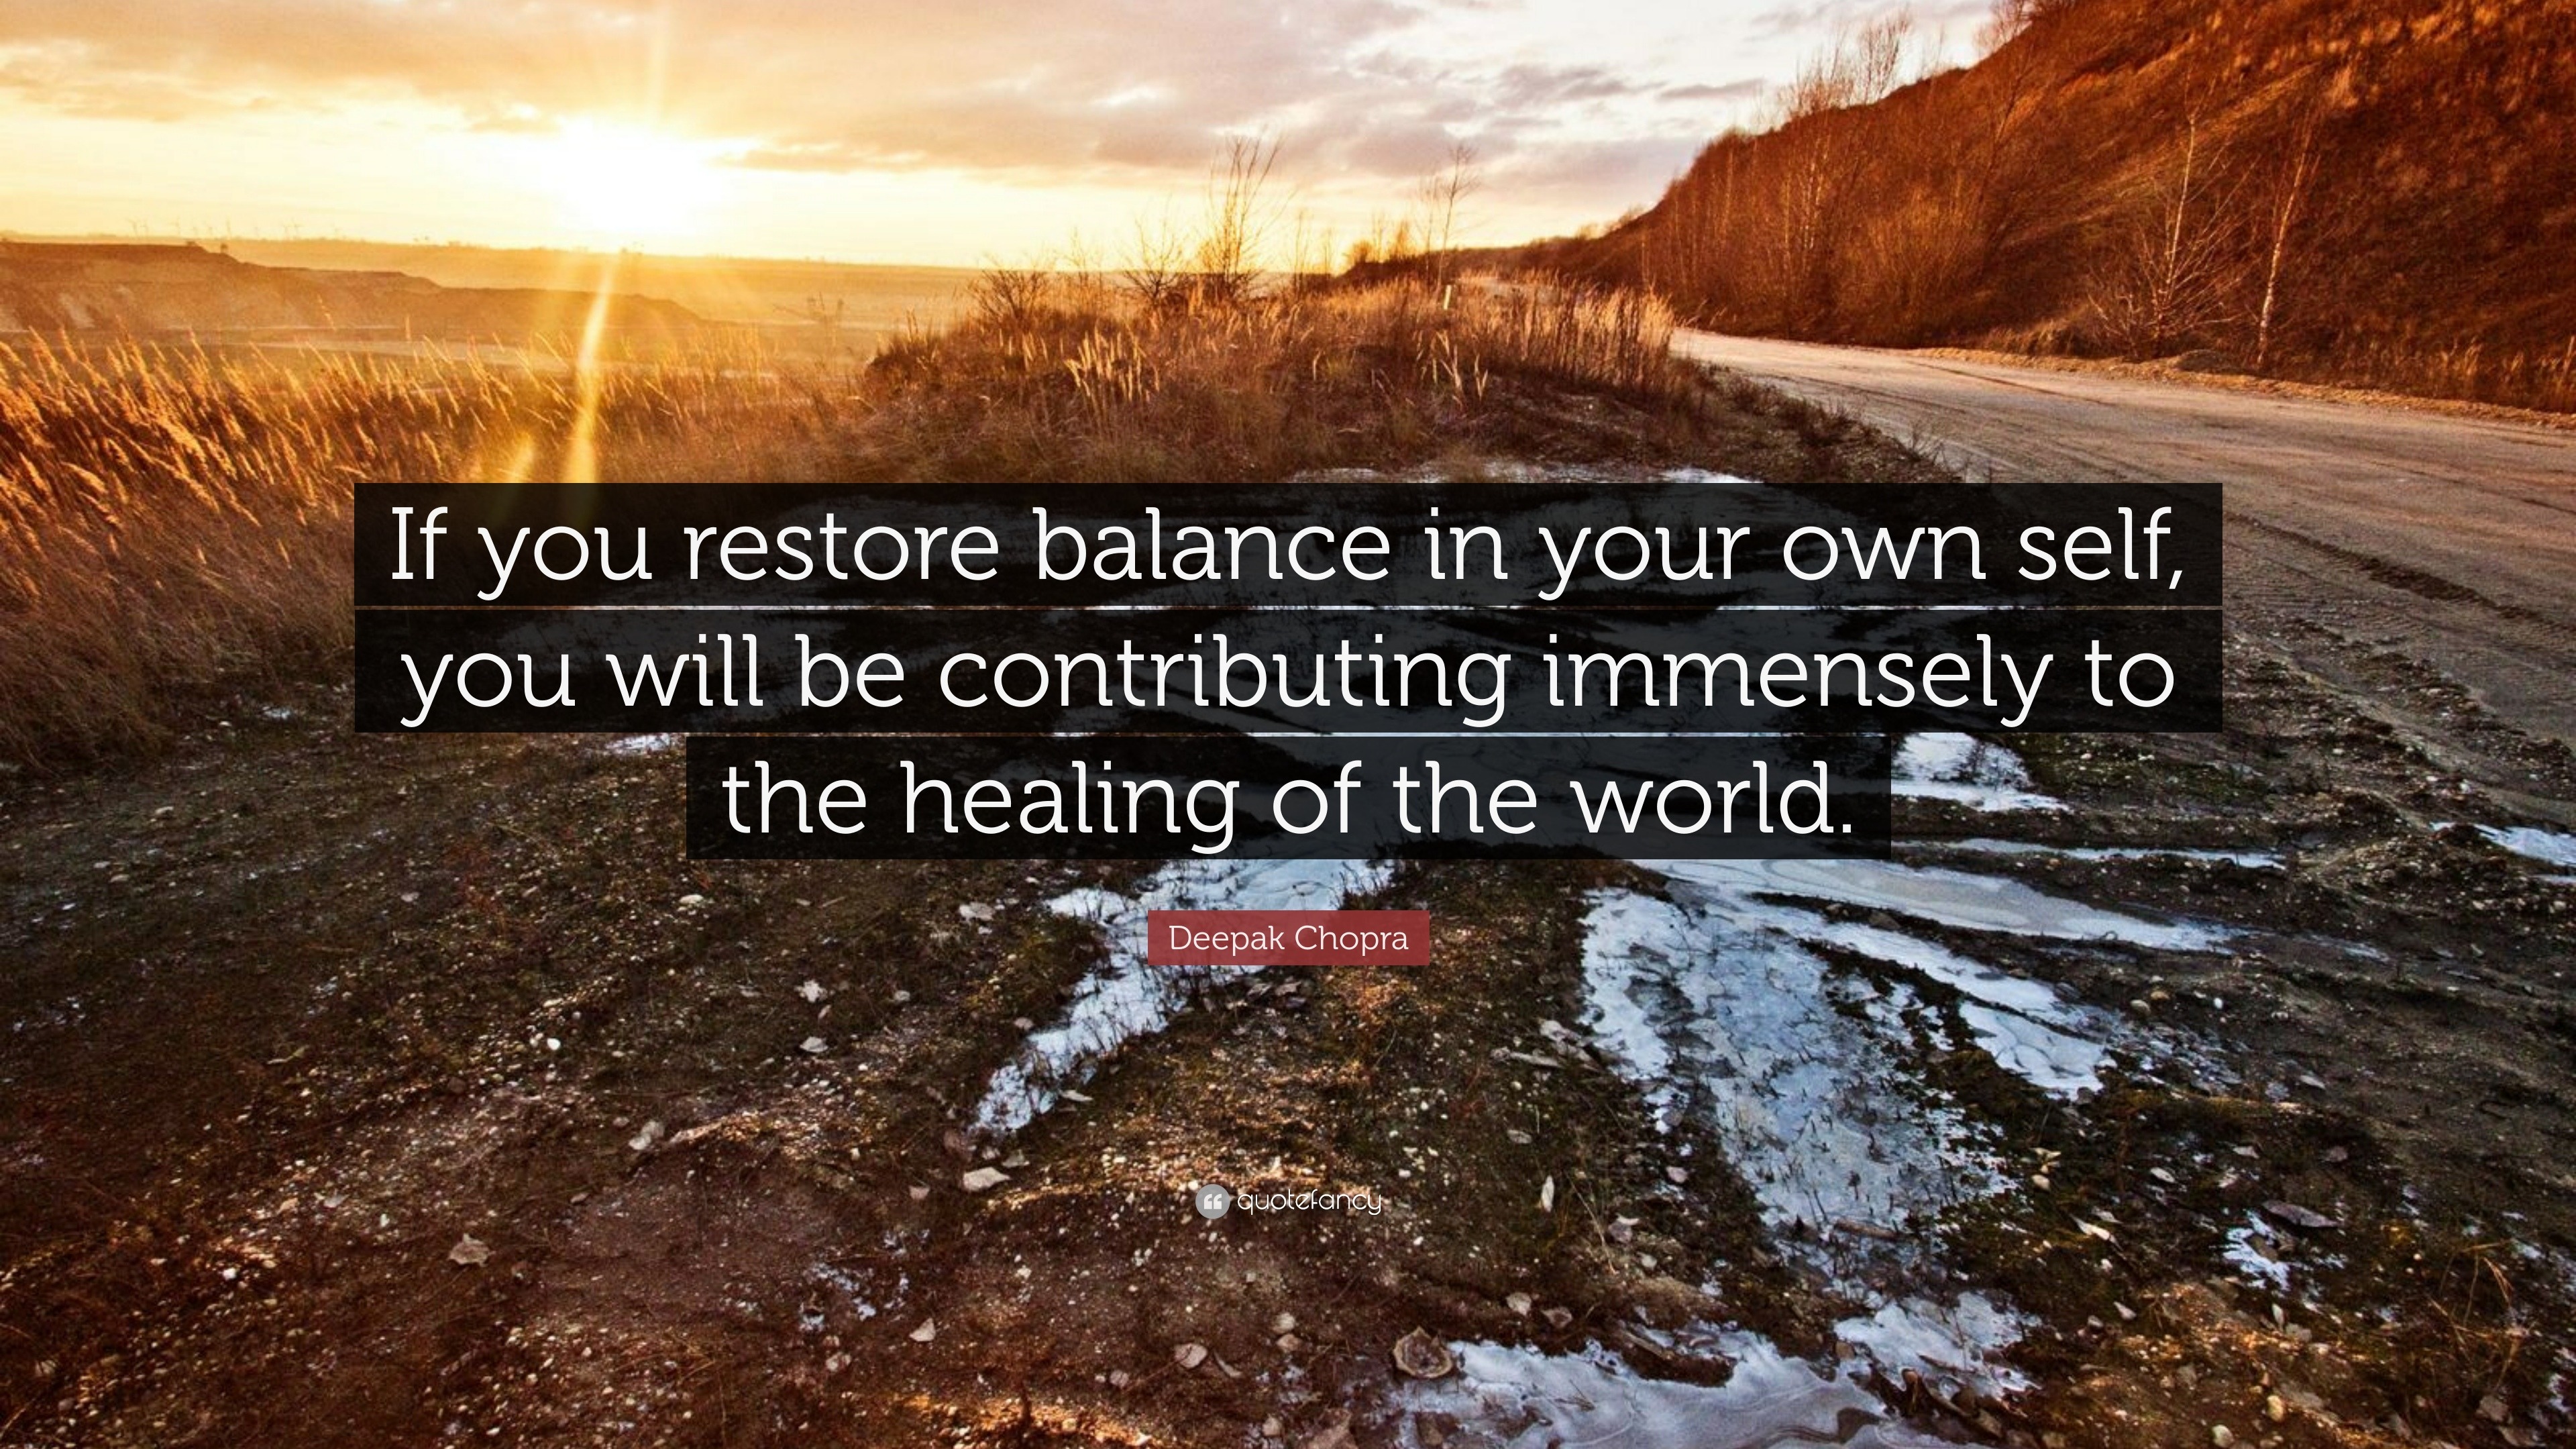 Deepak Chopra Quote “if You Restore Balance In Your Own Self You Will